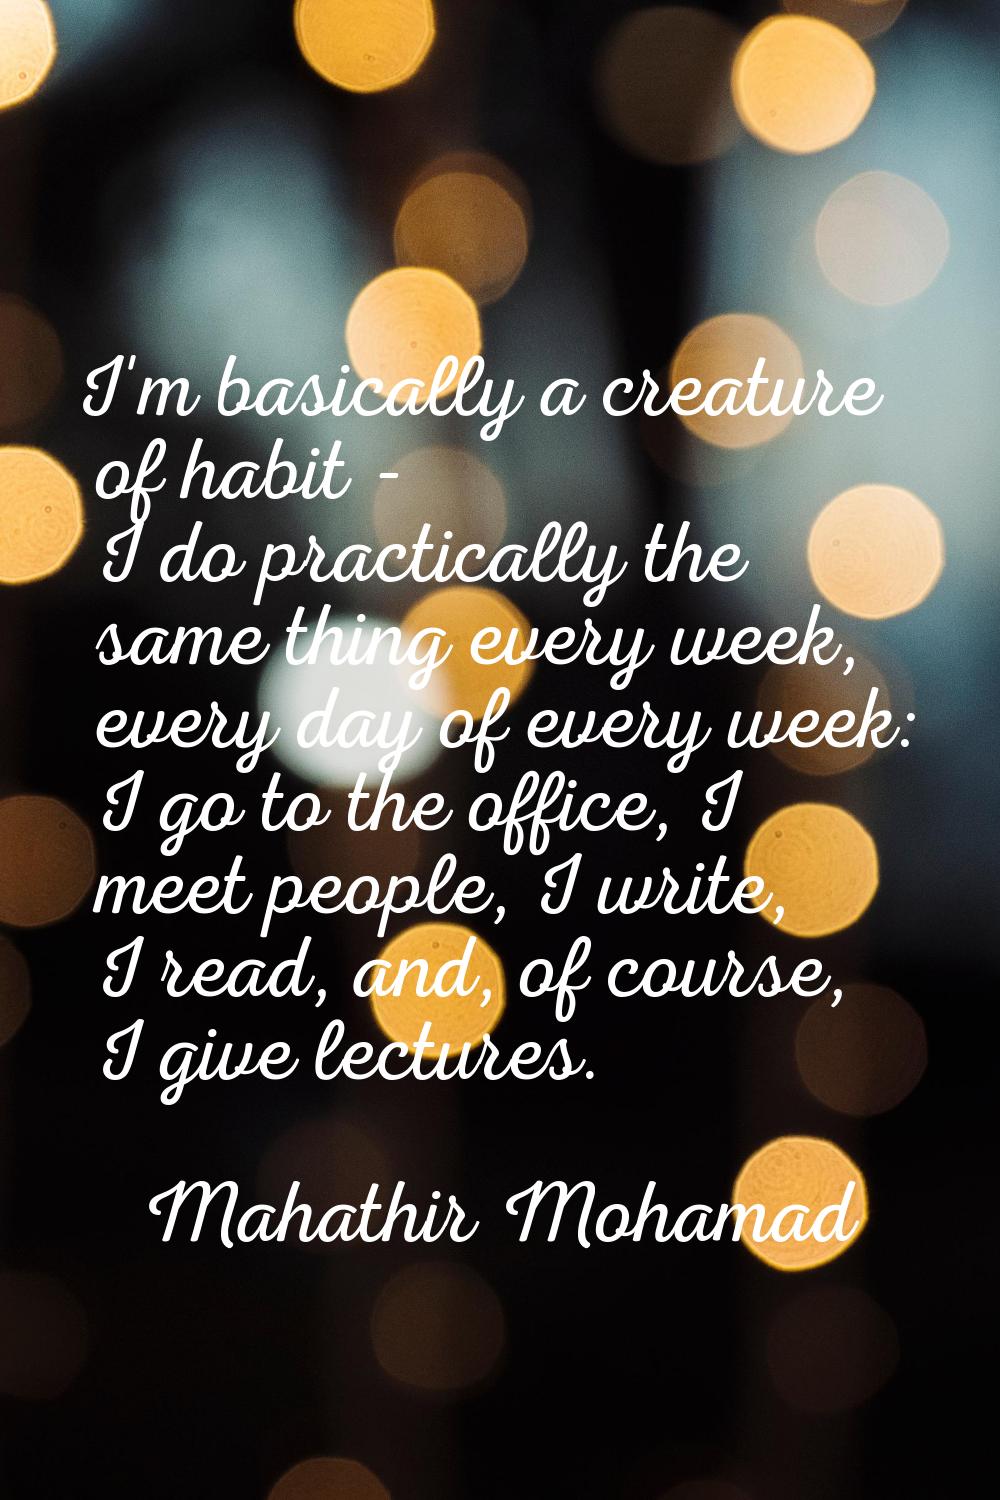 I'm basically a creature of habit - I do practically the same thing every week, every day of every 